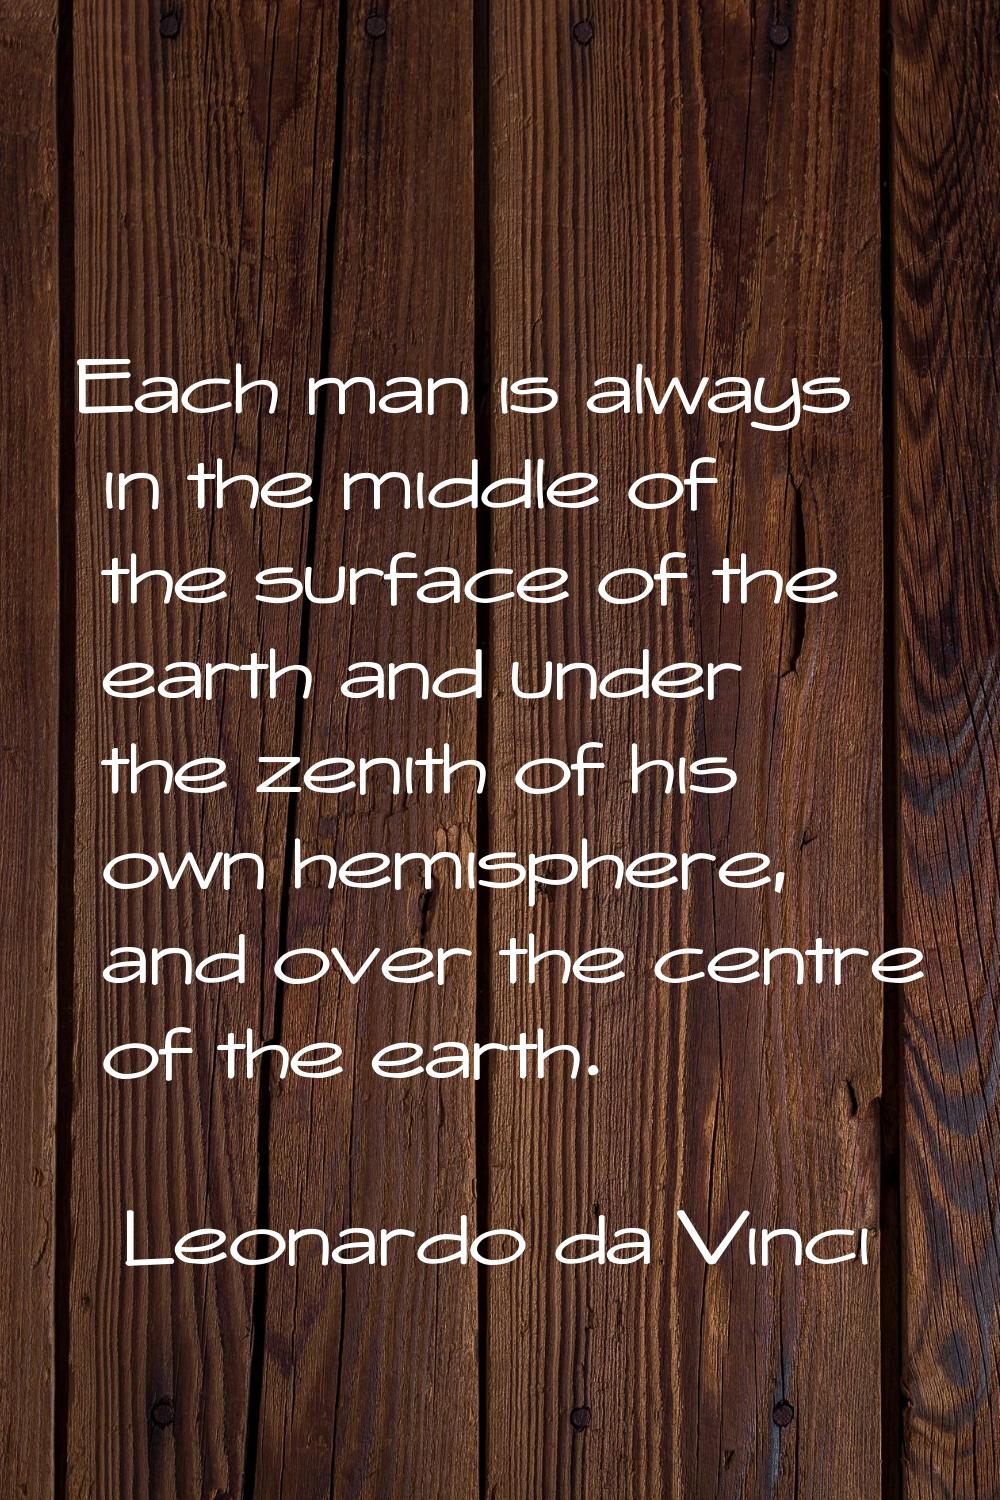 Each man is always in the middle of the surface of the earth and under the zenith of his own hemisp